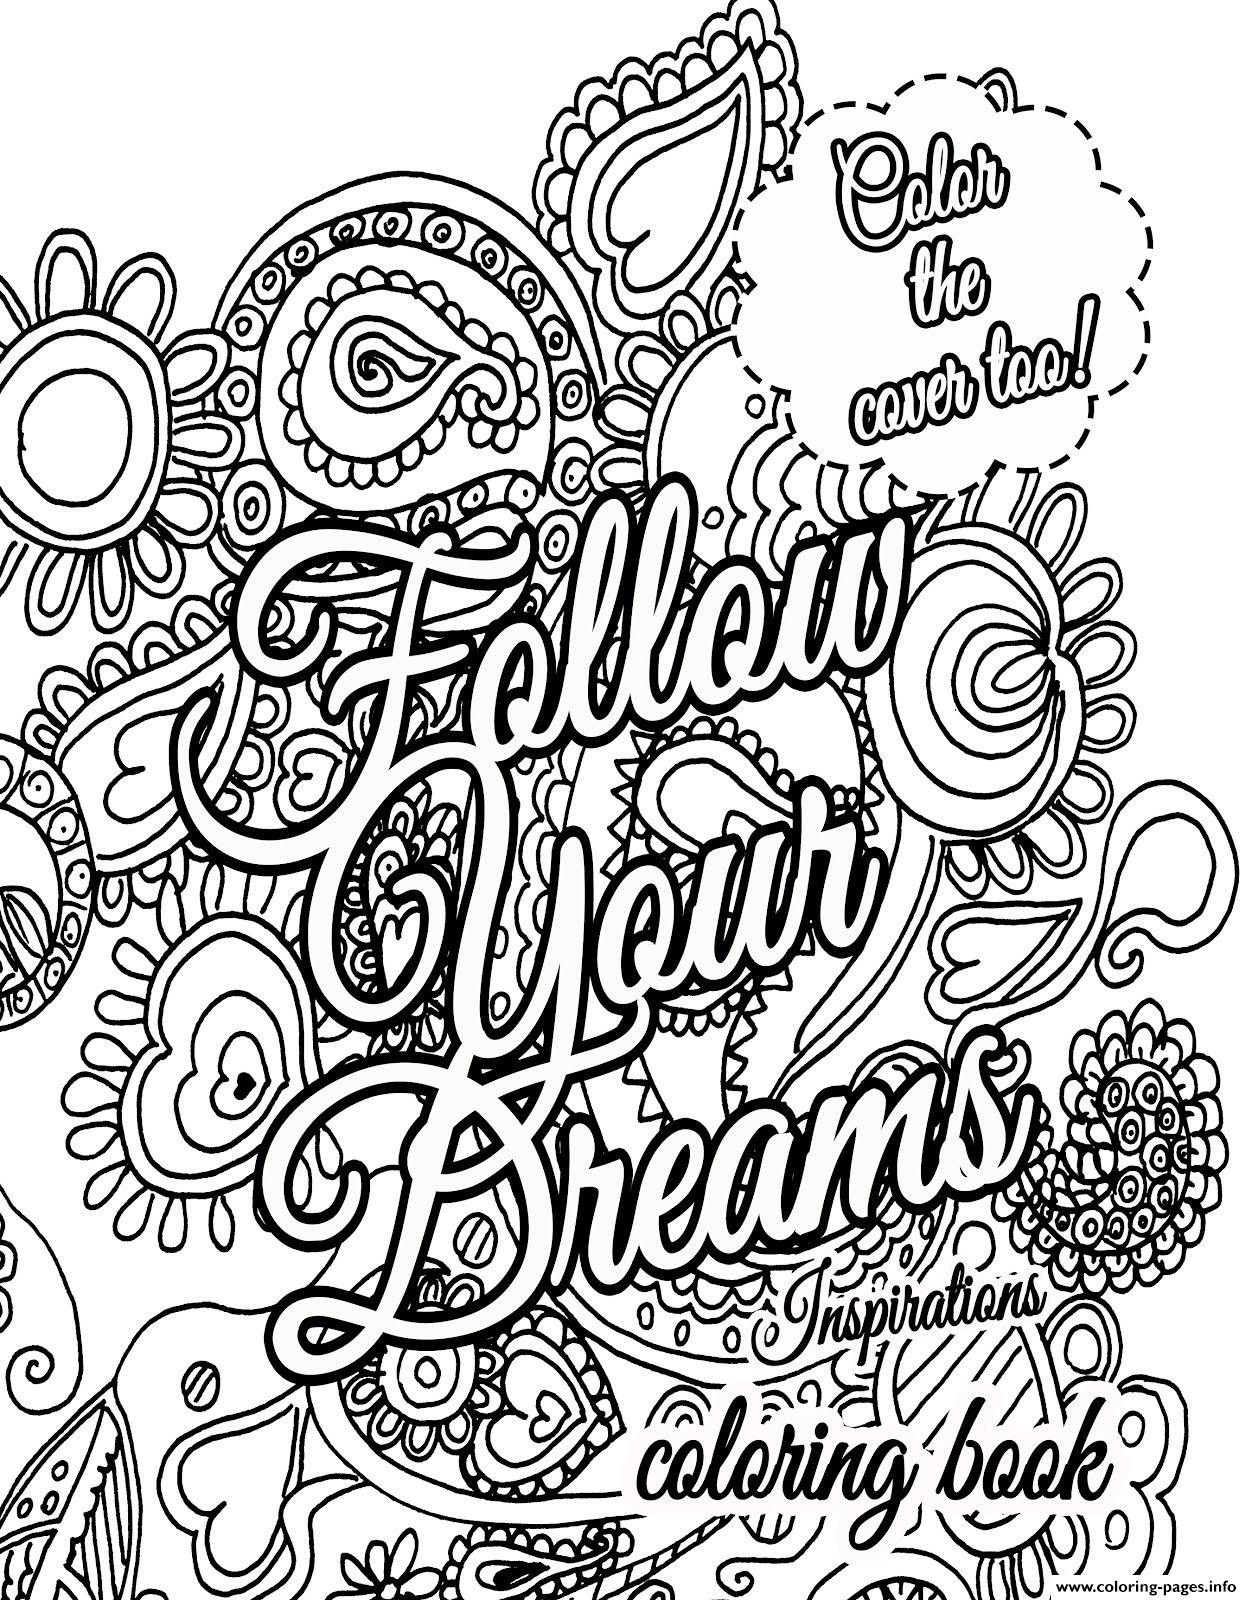 Free Printable Quote Coloring Pages For Adults
 Free Printable Inspirational Quotes Coloring Pages The